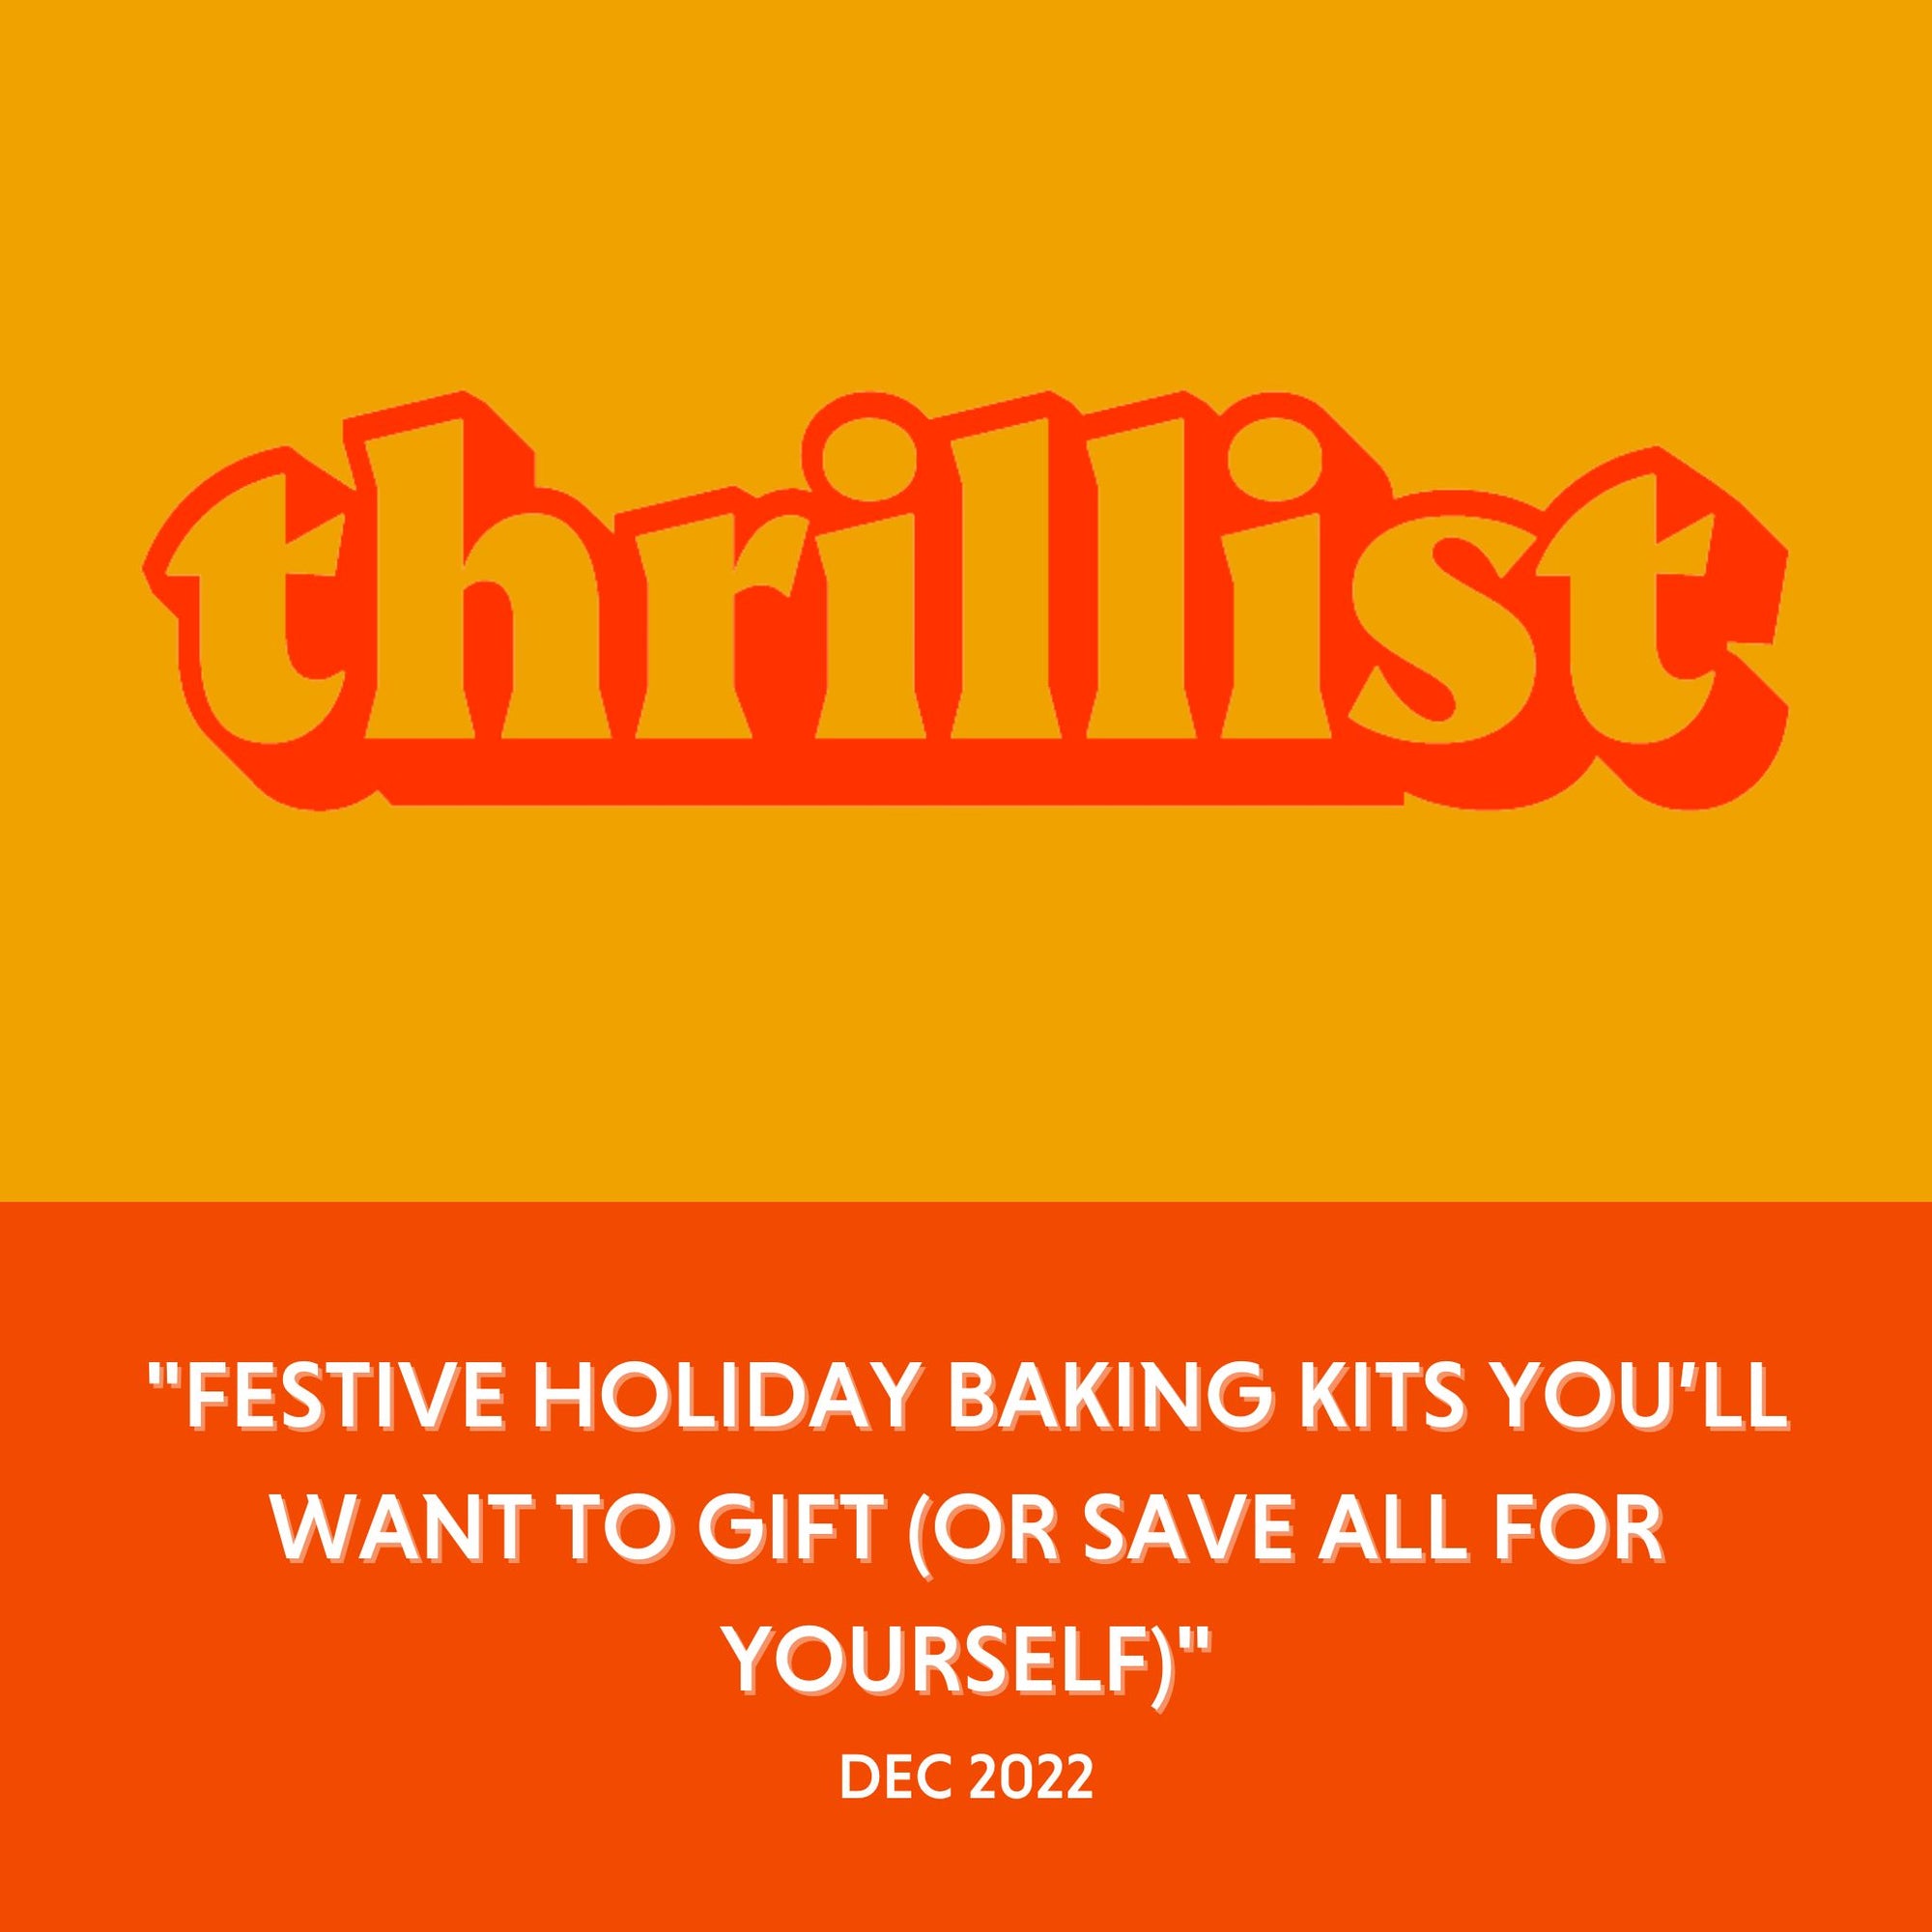 Thrillist - "Festive Holiday Baking Kits You’ll Want to Gift (or Save All for Yourself)" -  Dec 2022